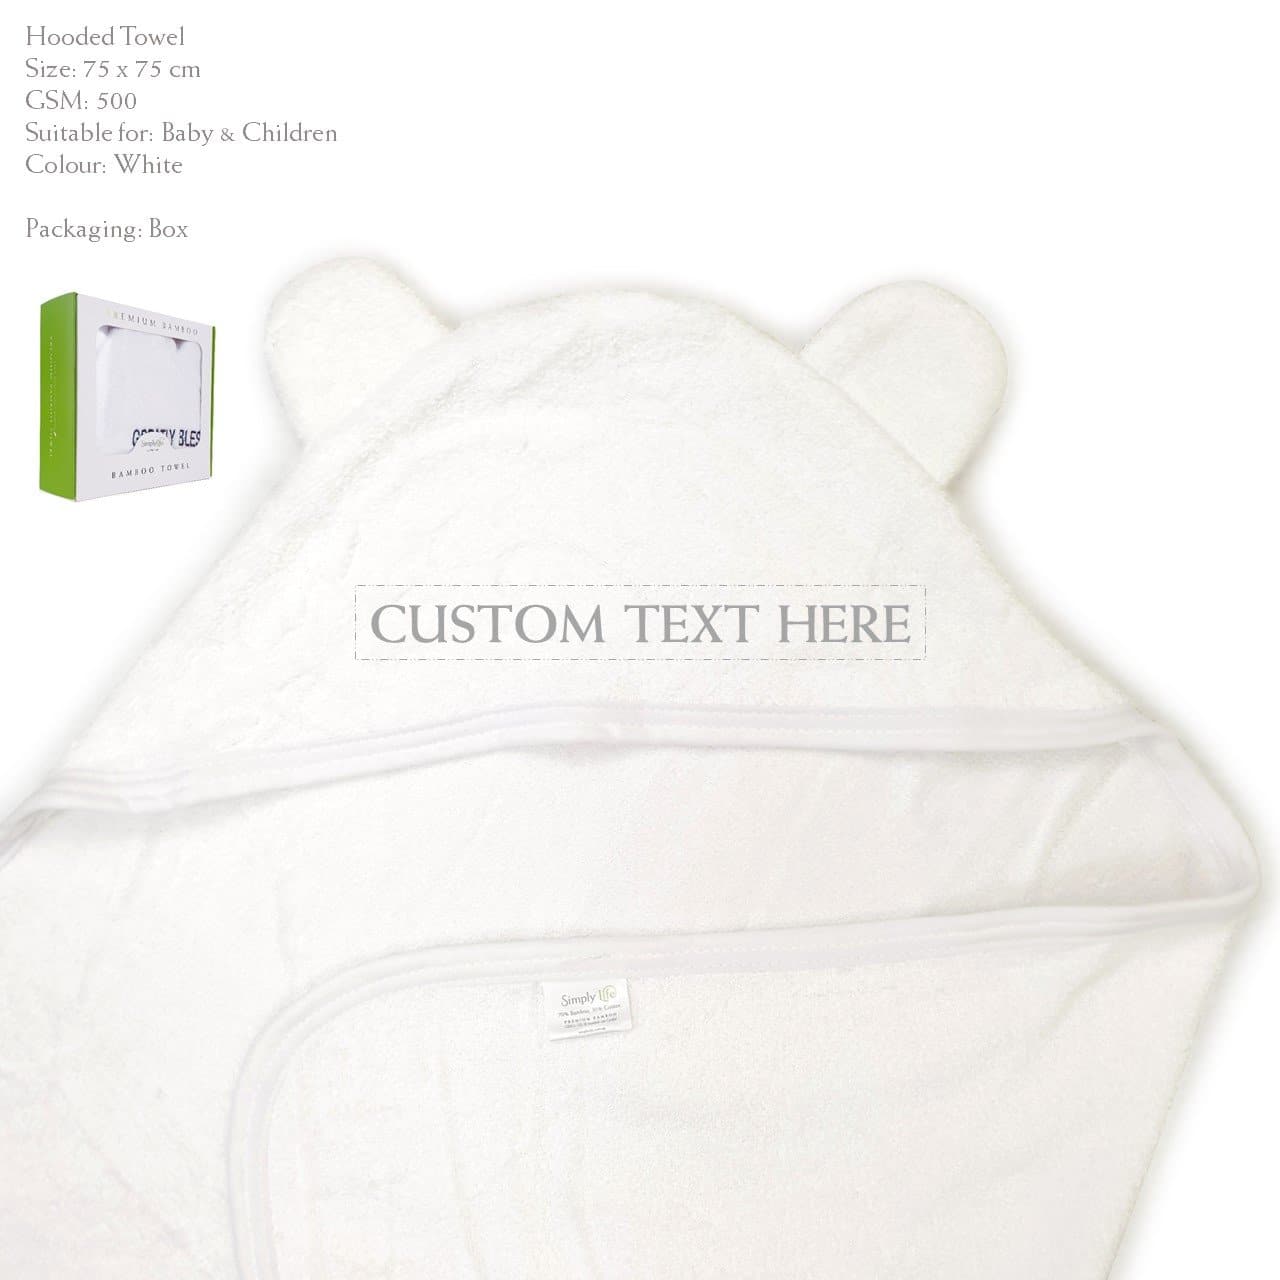 Personalised Bamboo Bath Towel | Custom Embroidery Text - Simply Life